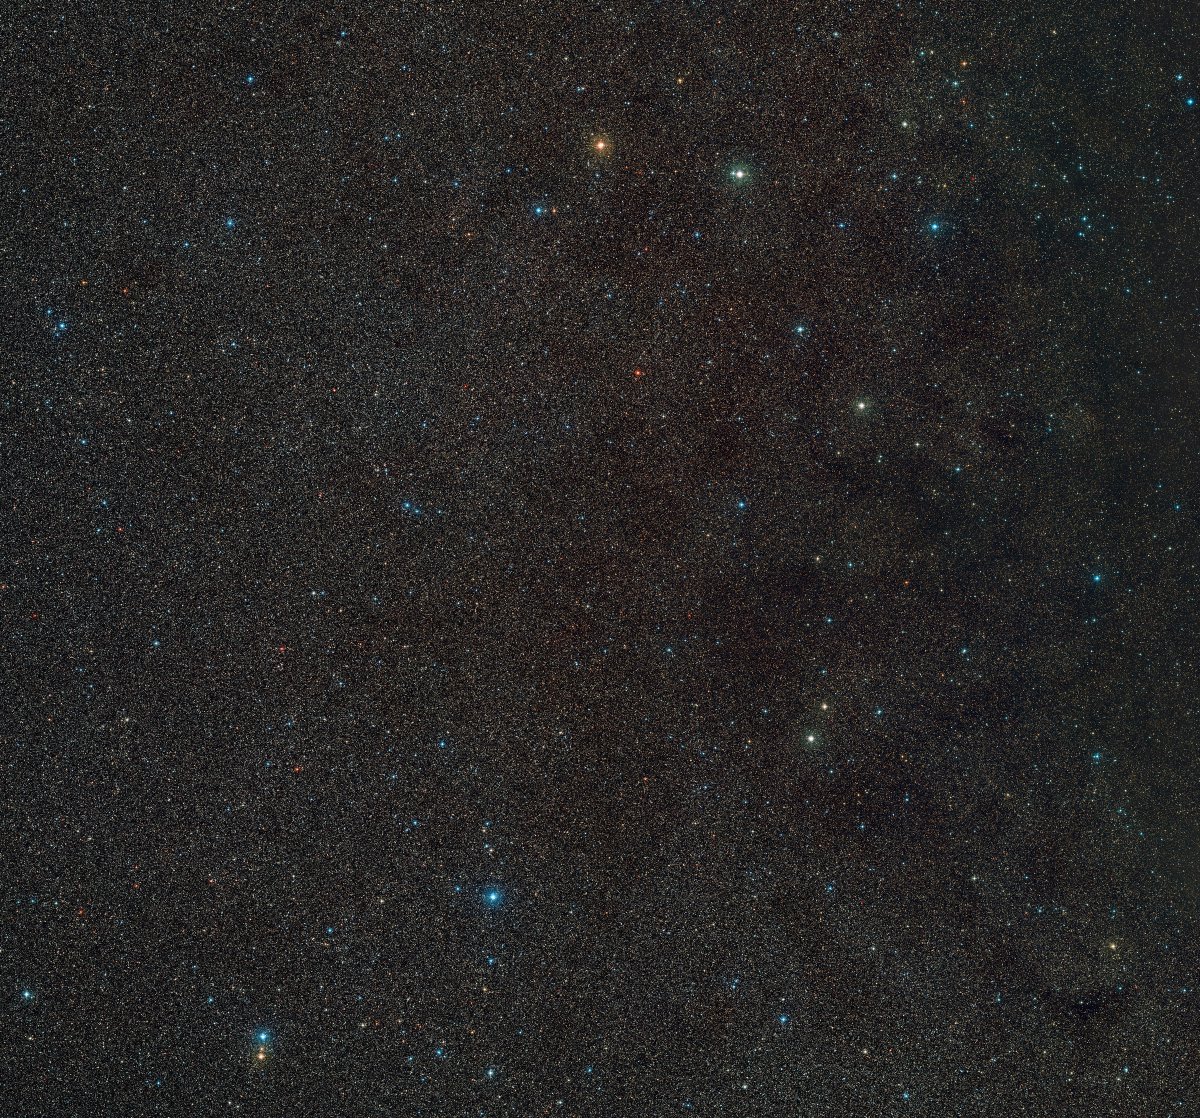 Stunning: A wide-field view of the area around Gaia BH3, the most massive stellar black hole in our galaxy

The black hole itself is not visible, but the star that orbits around it can be seen right at the centre of this image

(Credit: ESO/Digitized Sky Survey 2/D. De Martin)